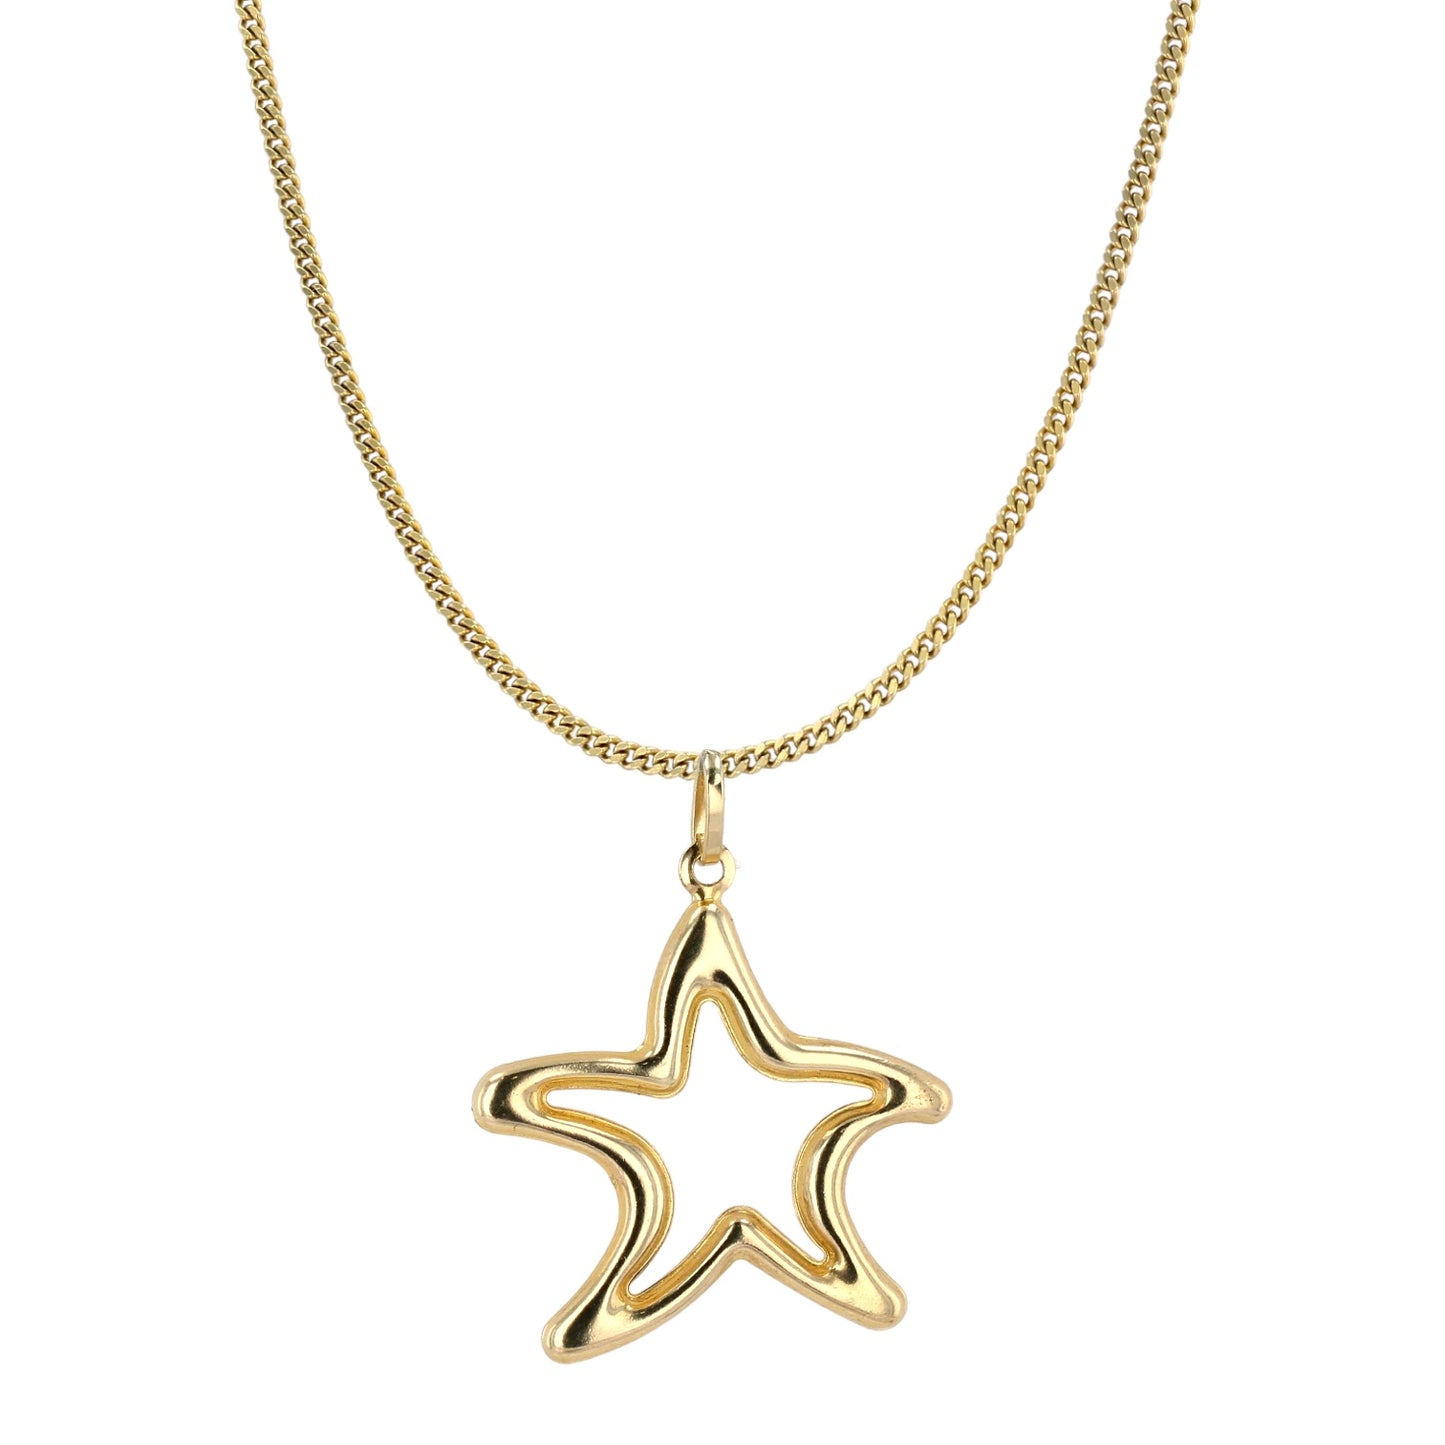 10k yellow gold Star necklace-50026